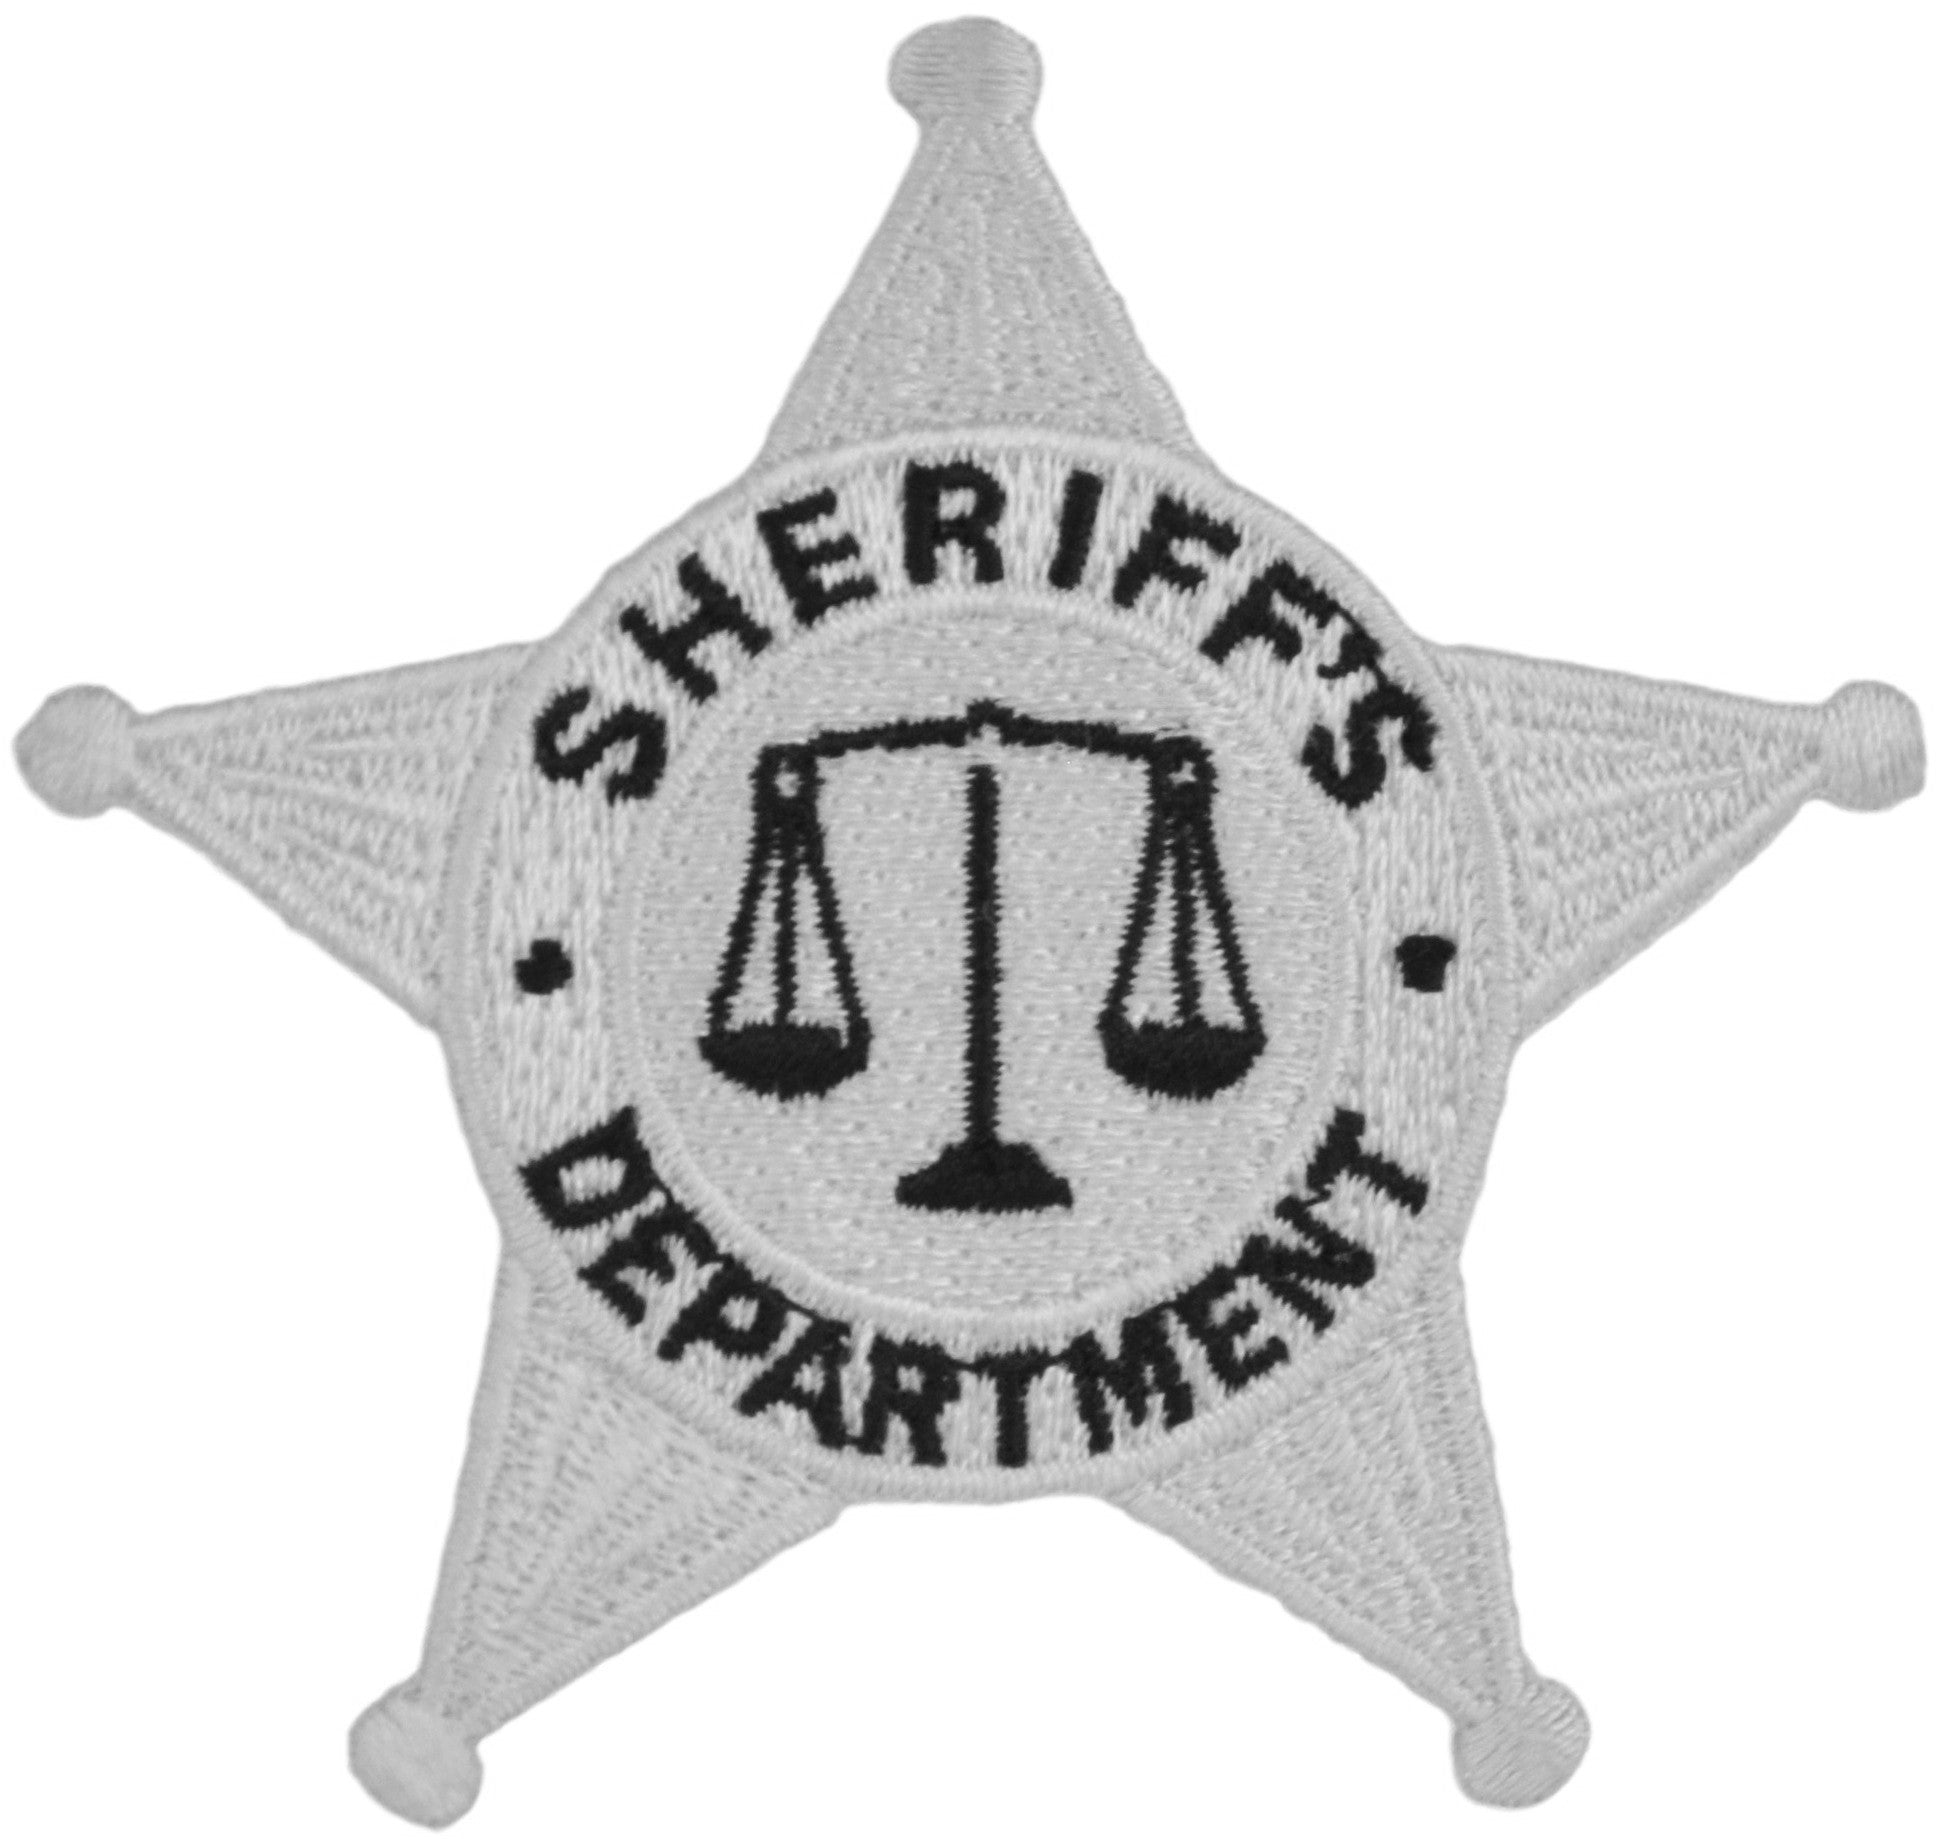 5-Point Sheriff's Badge Lapel Pin / Tie Tack